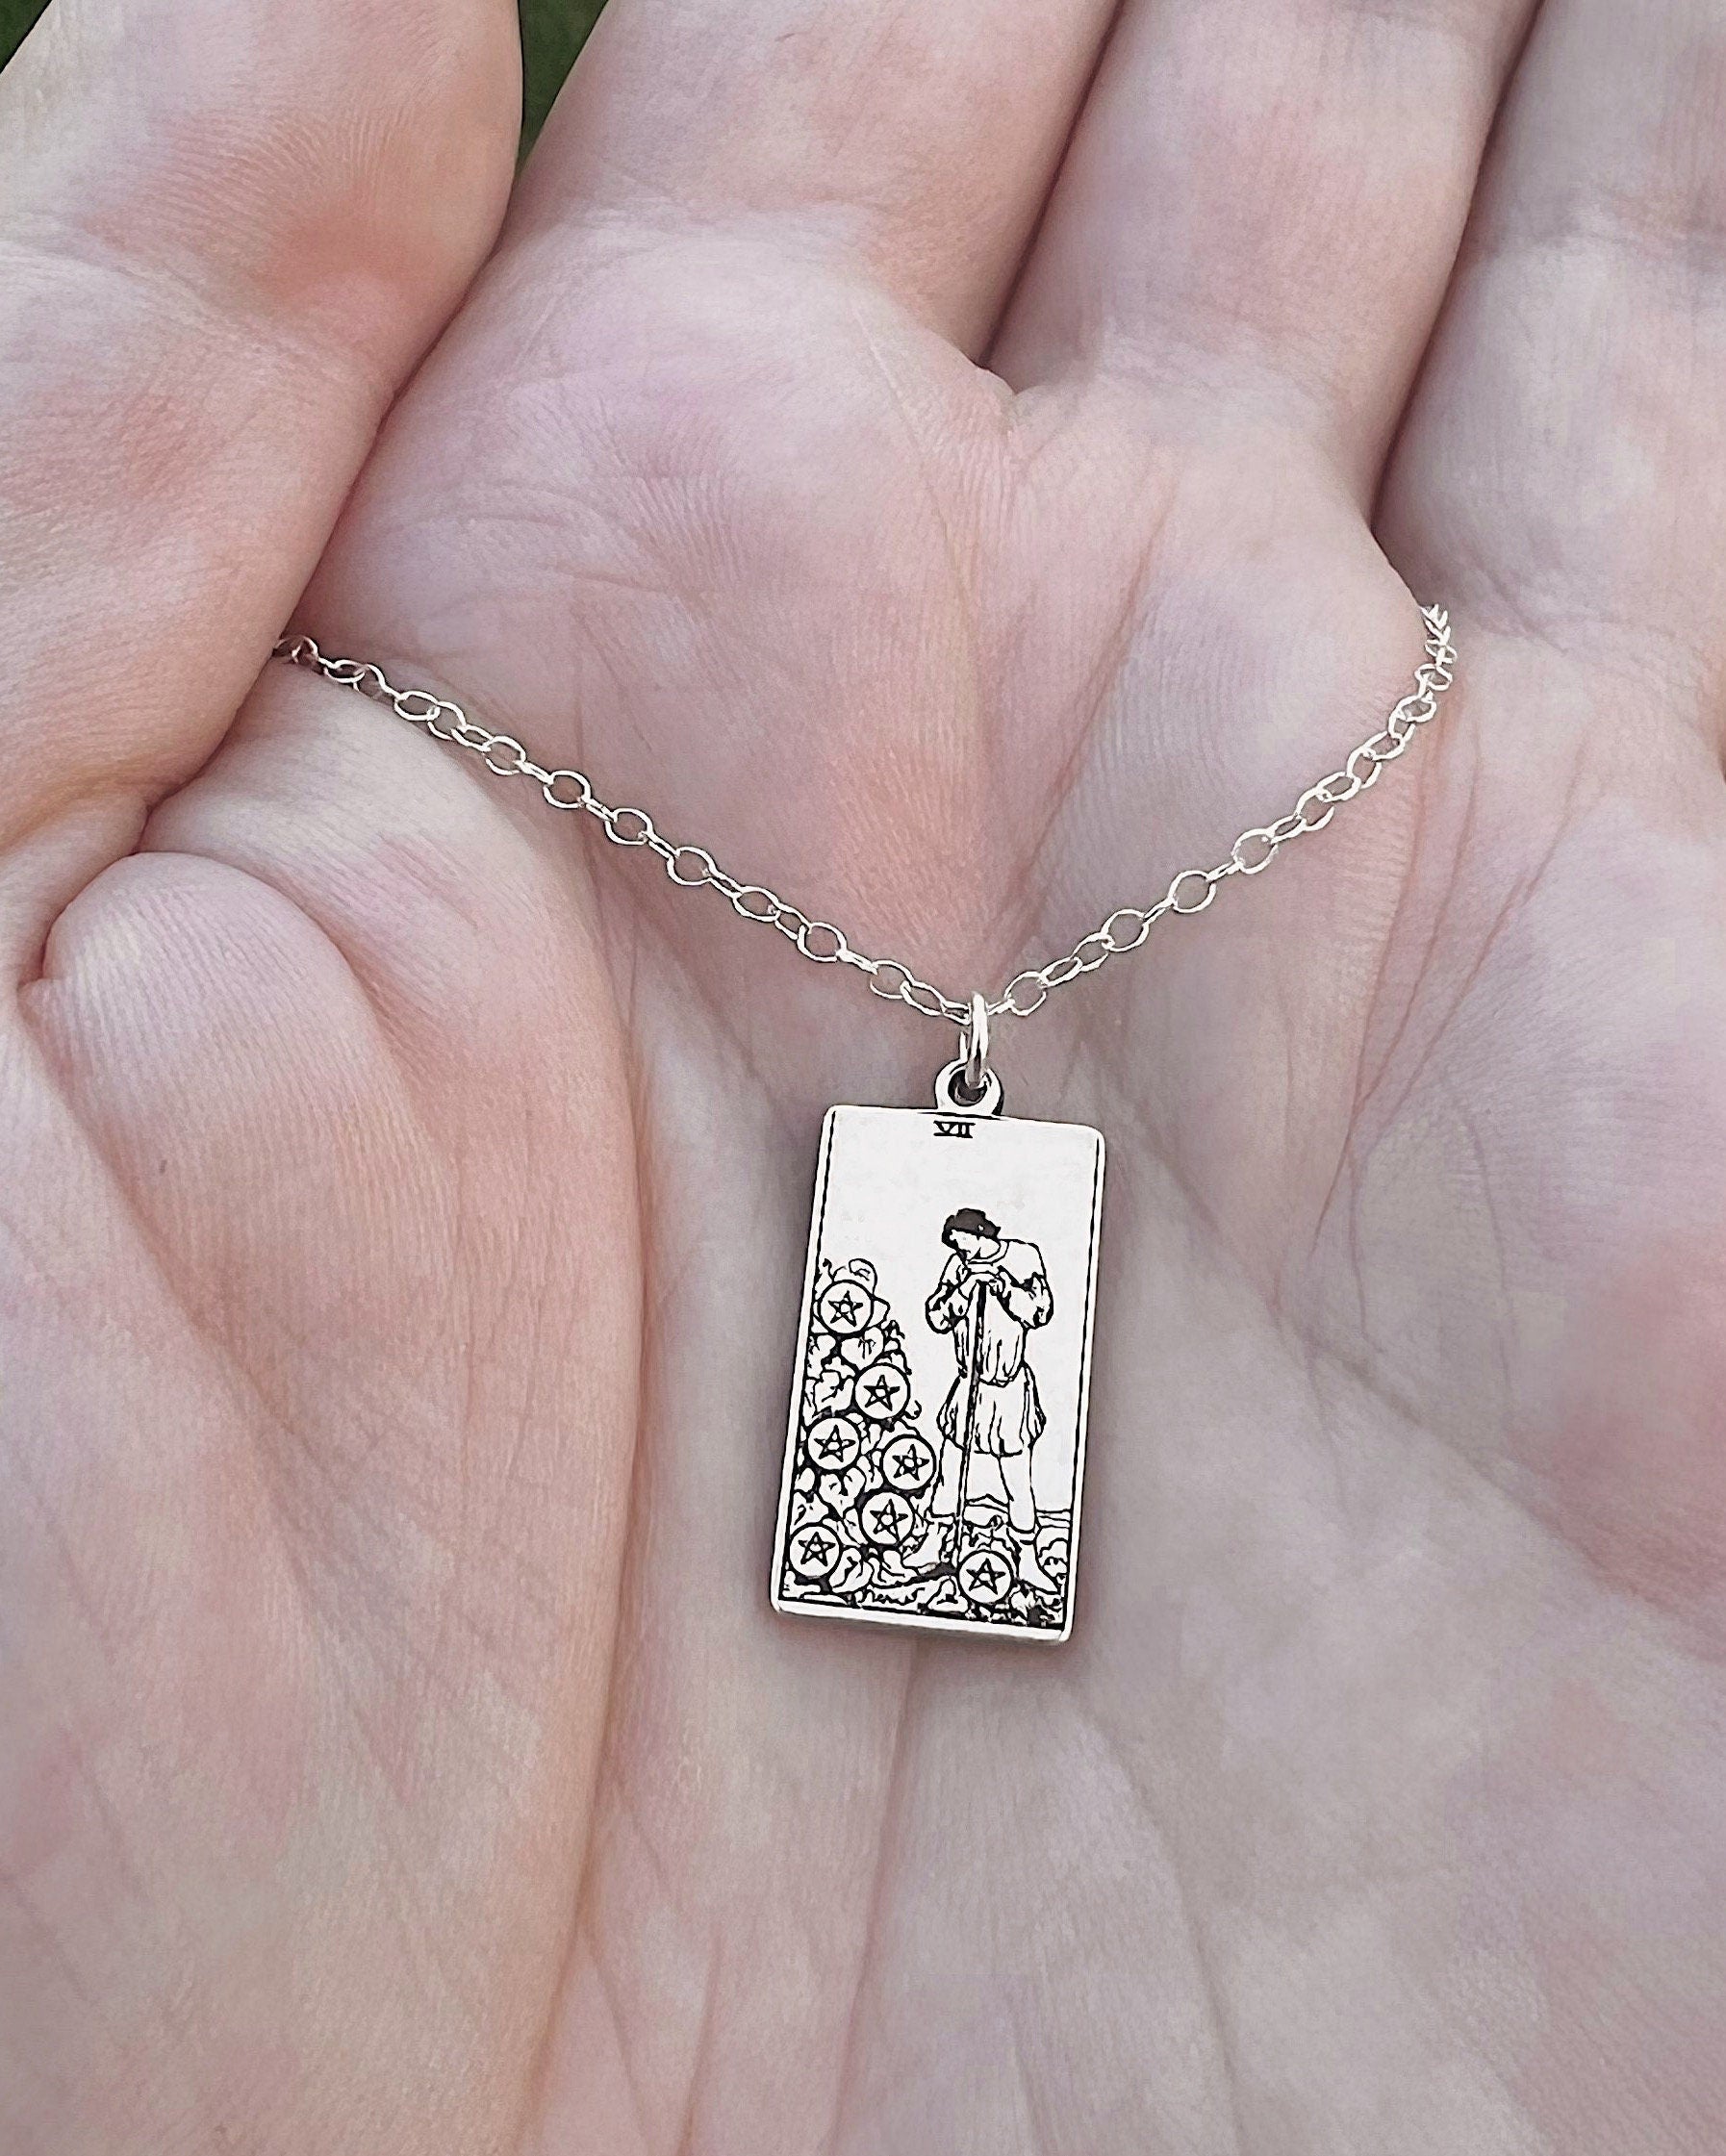 Seven of Pentacles Tarot Card Necklace - Sterling Silver